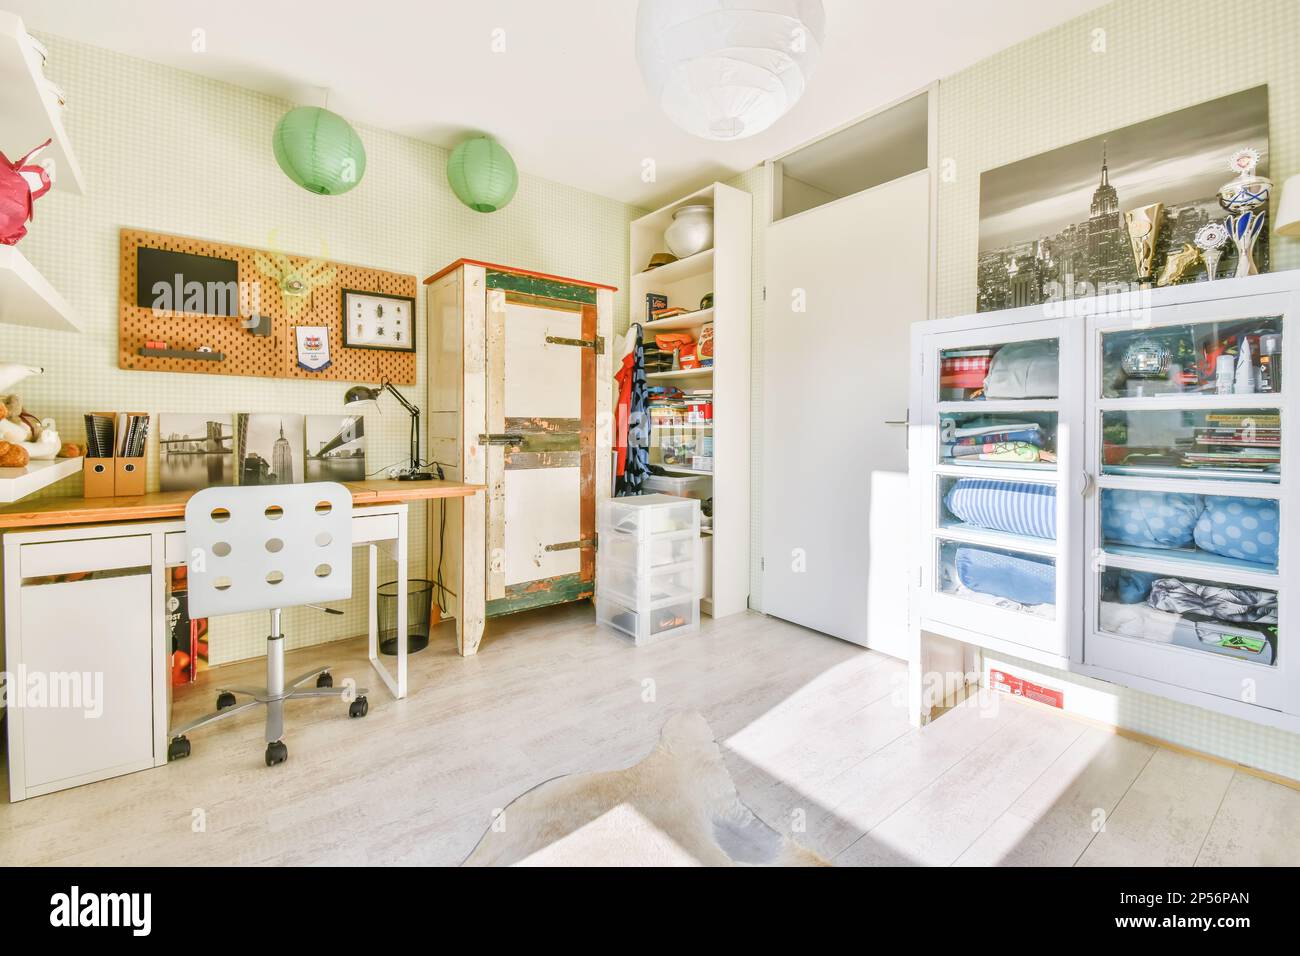 Amsterdam, Netherlands - 10 April, 2021: a kitchen with lots of stuff on the counters and shelves in front of the refrigerator freezer is white Stock Photo